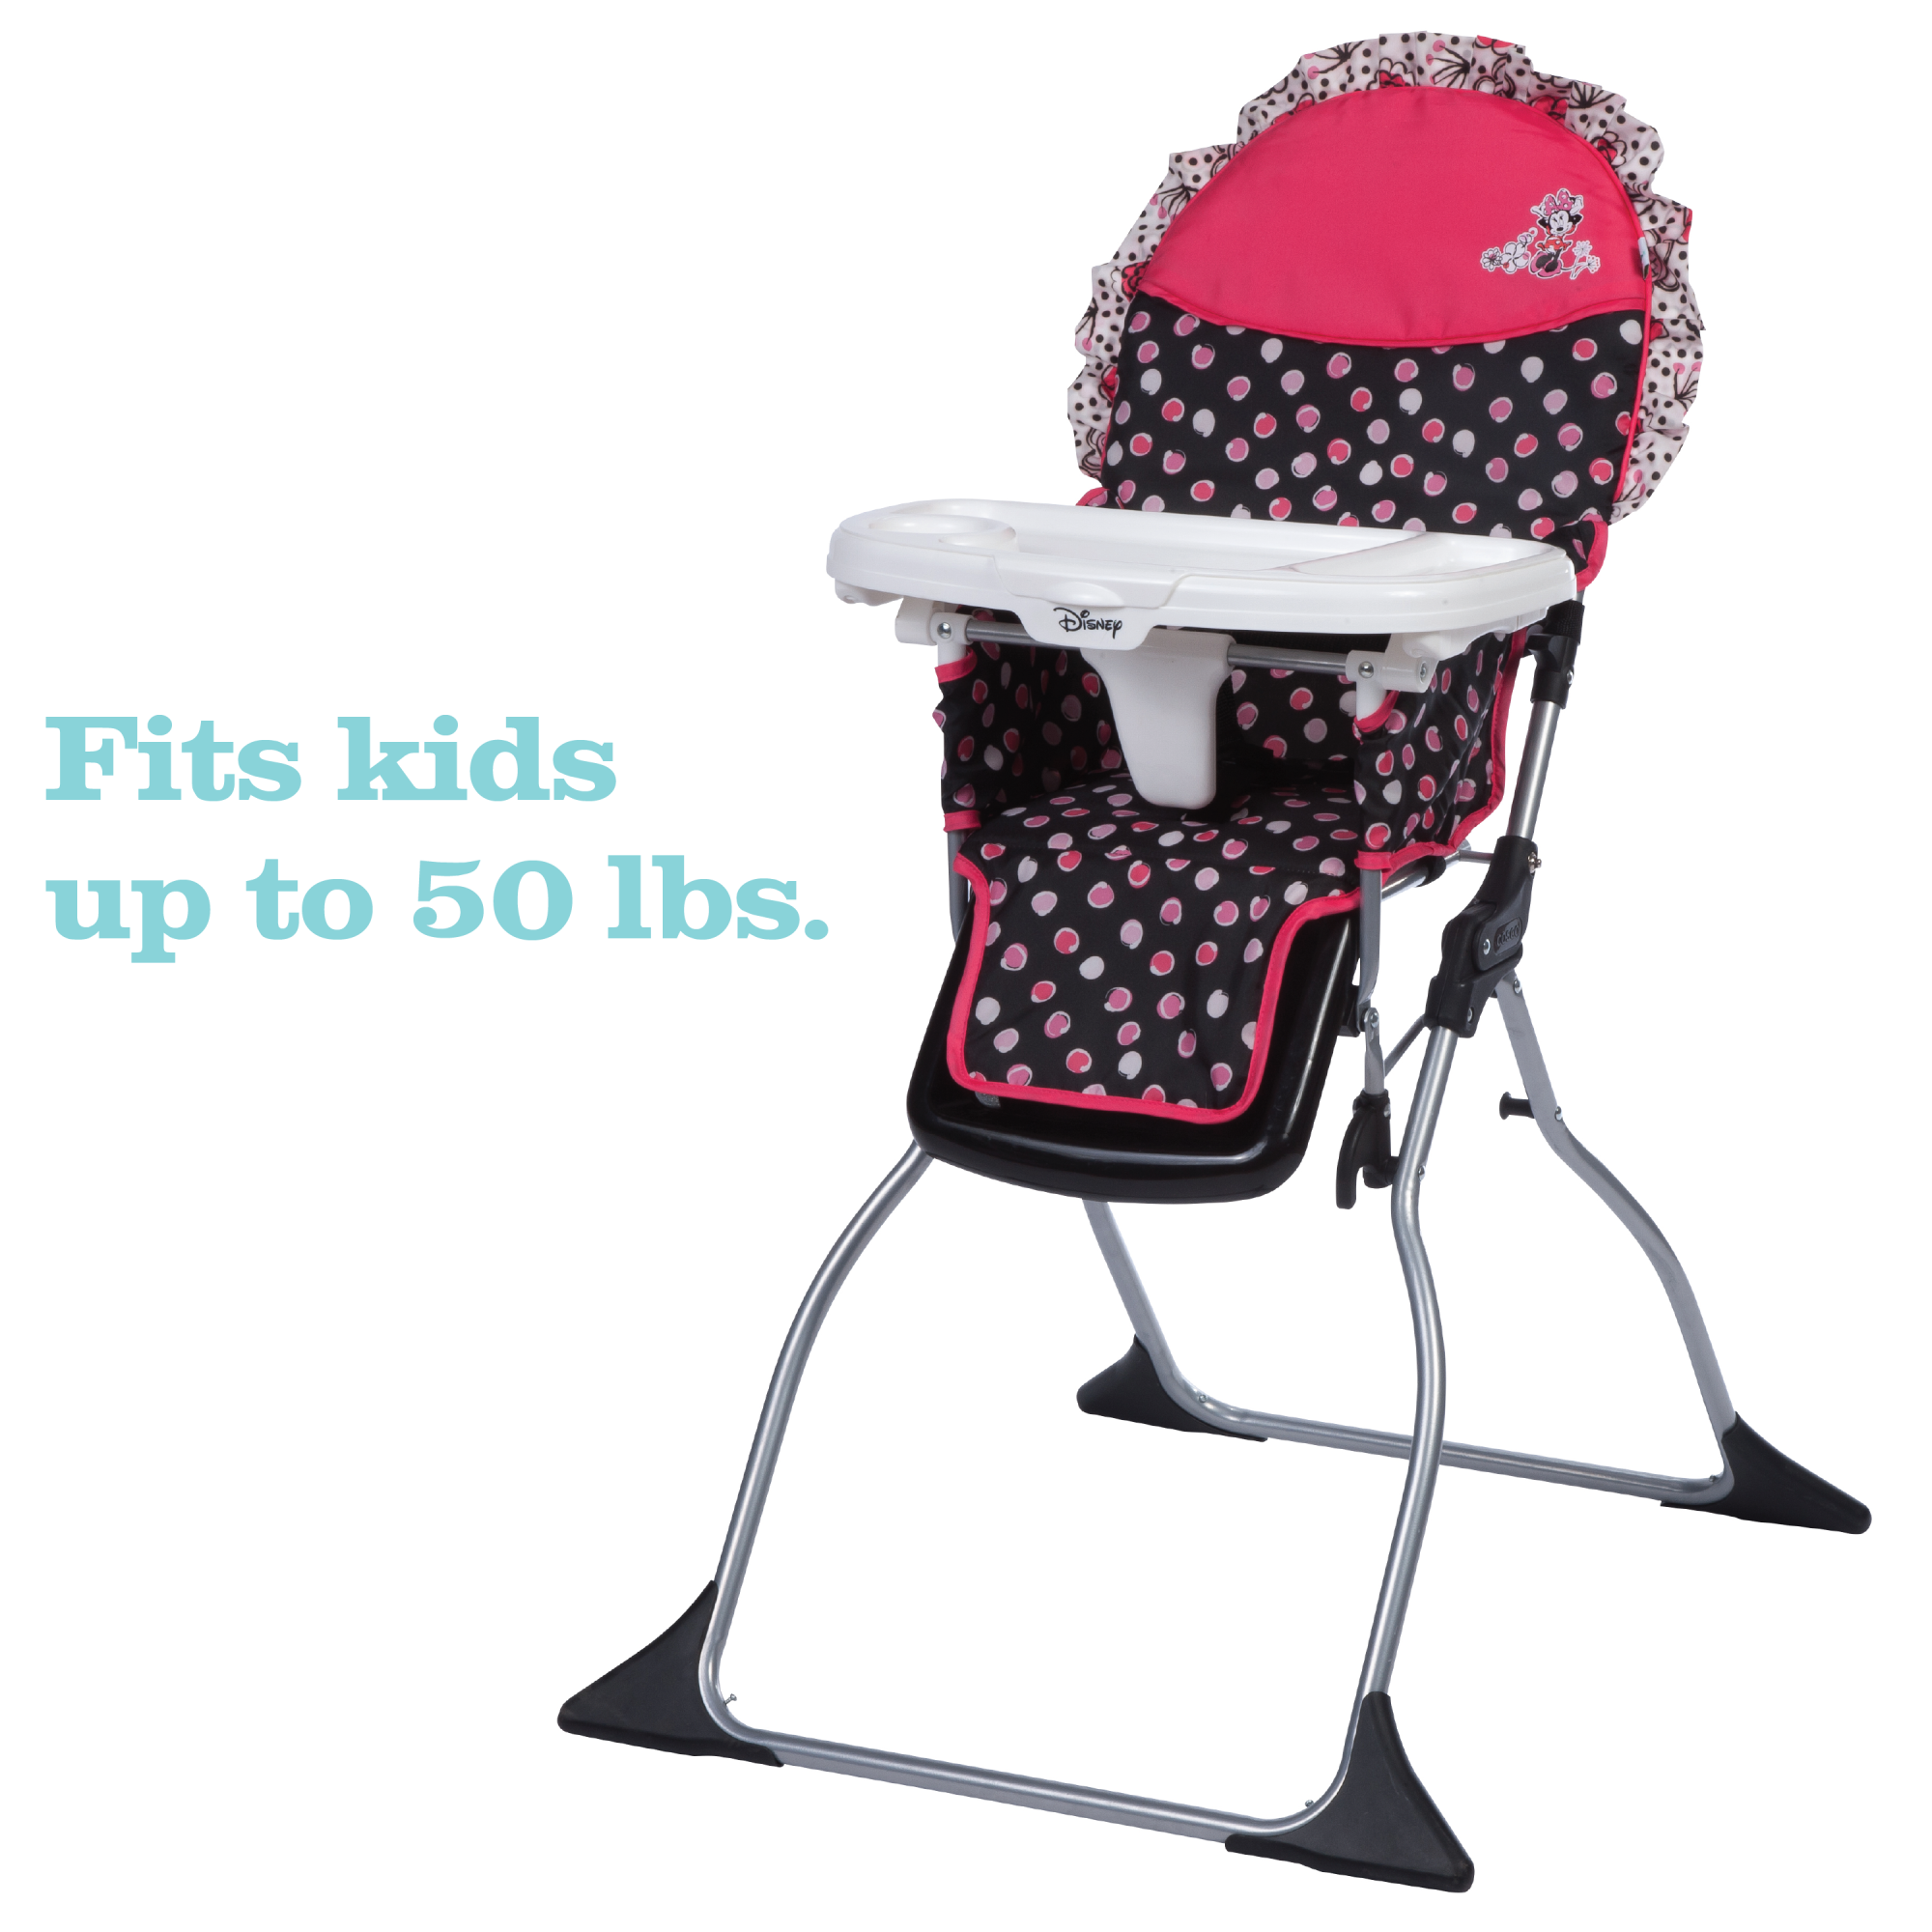 Disney Baby Minnie Simple Fold™ Plus High Chair - fits kids up to 50 lbs.